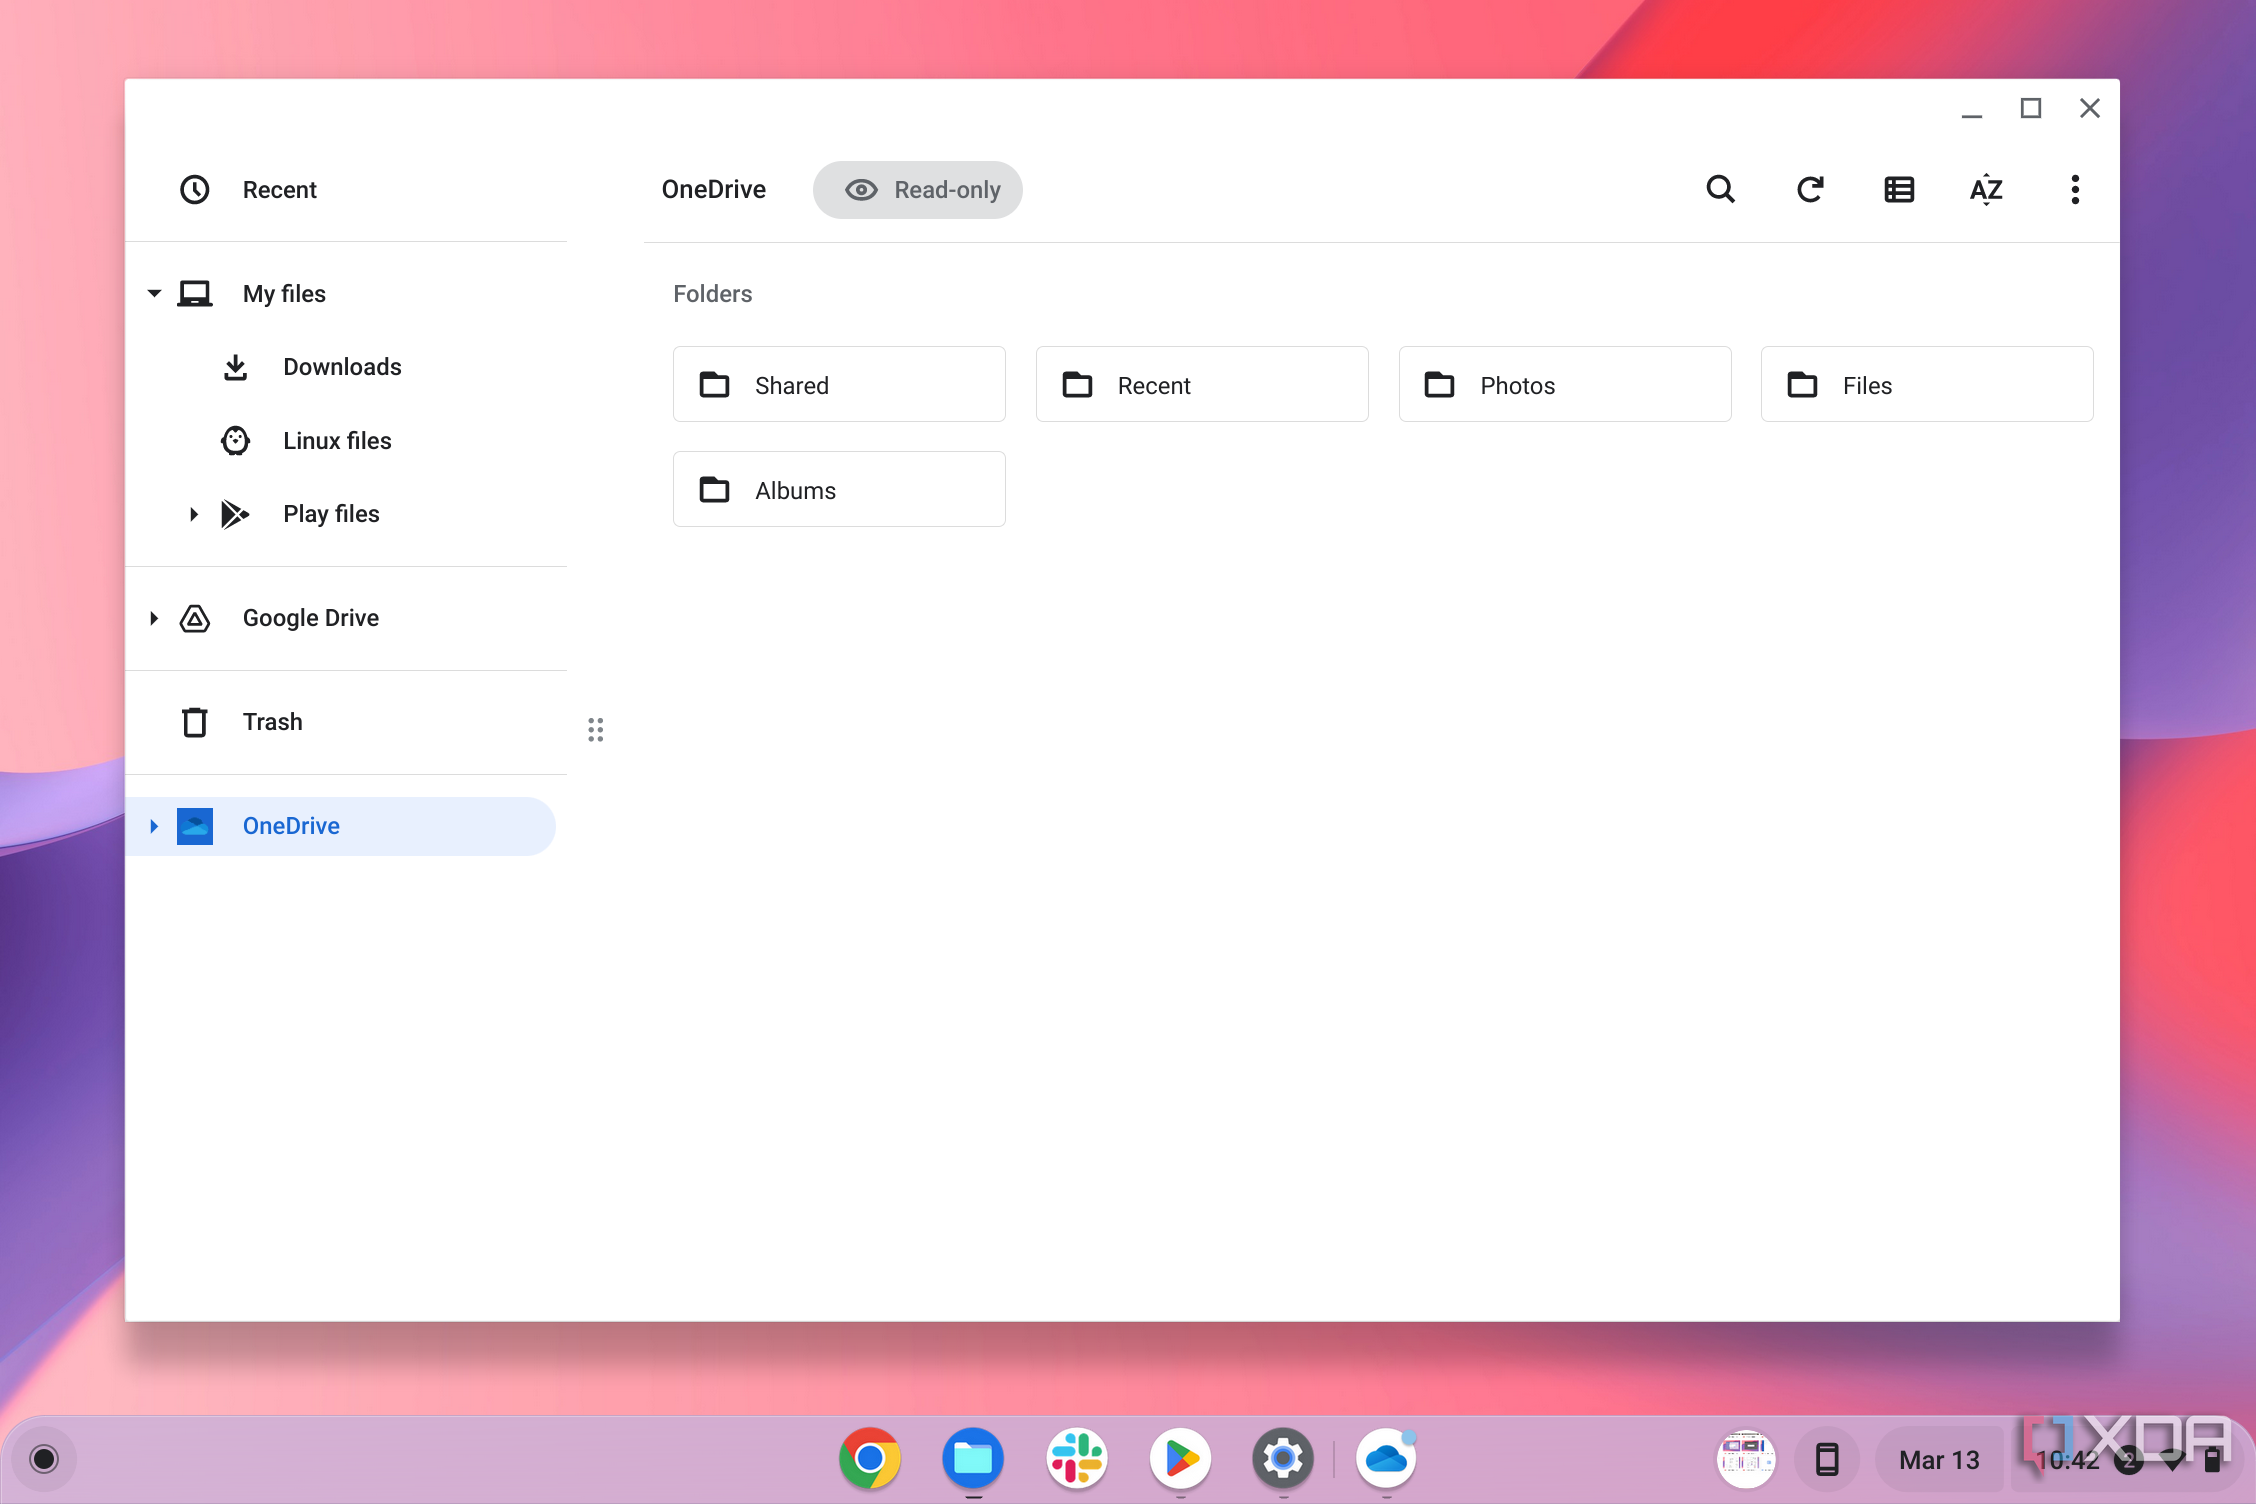 The ChromeOS read-only Files app shows OneDrive